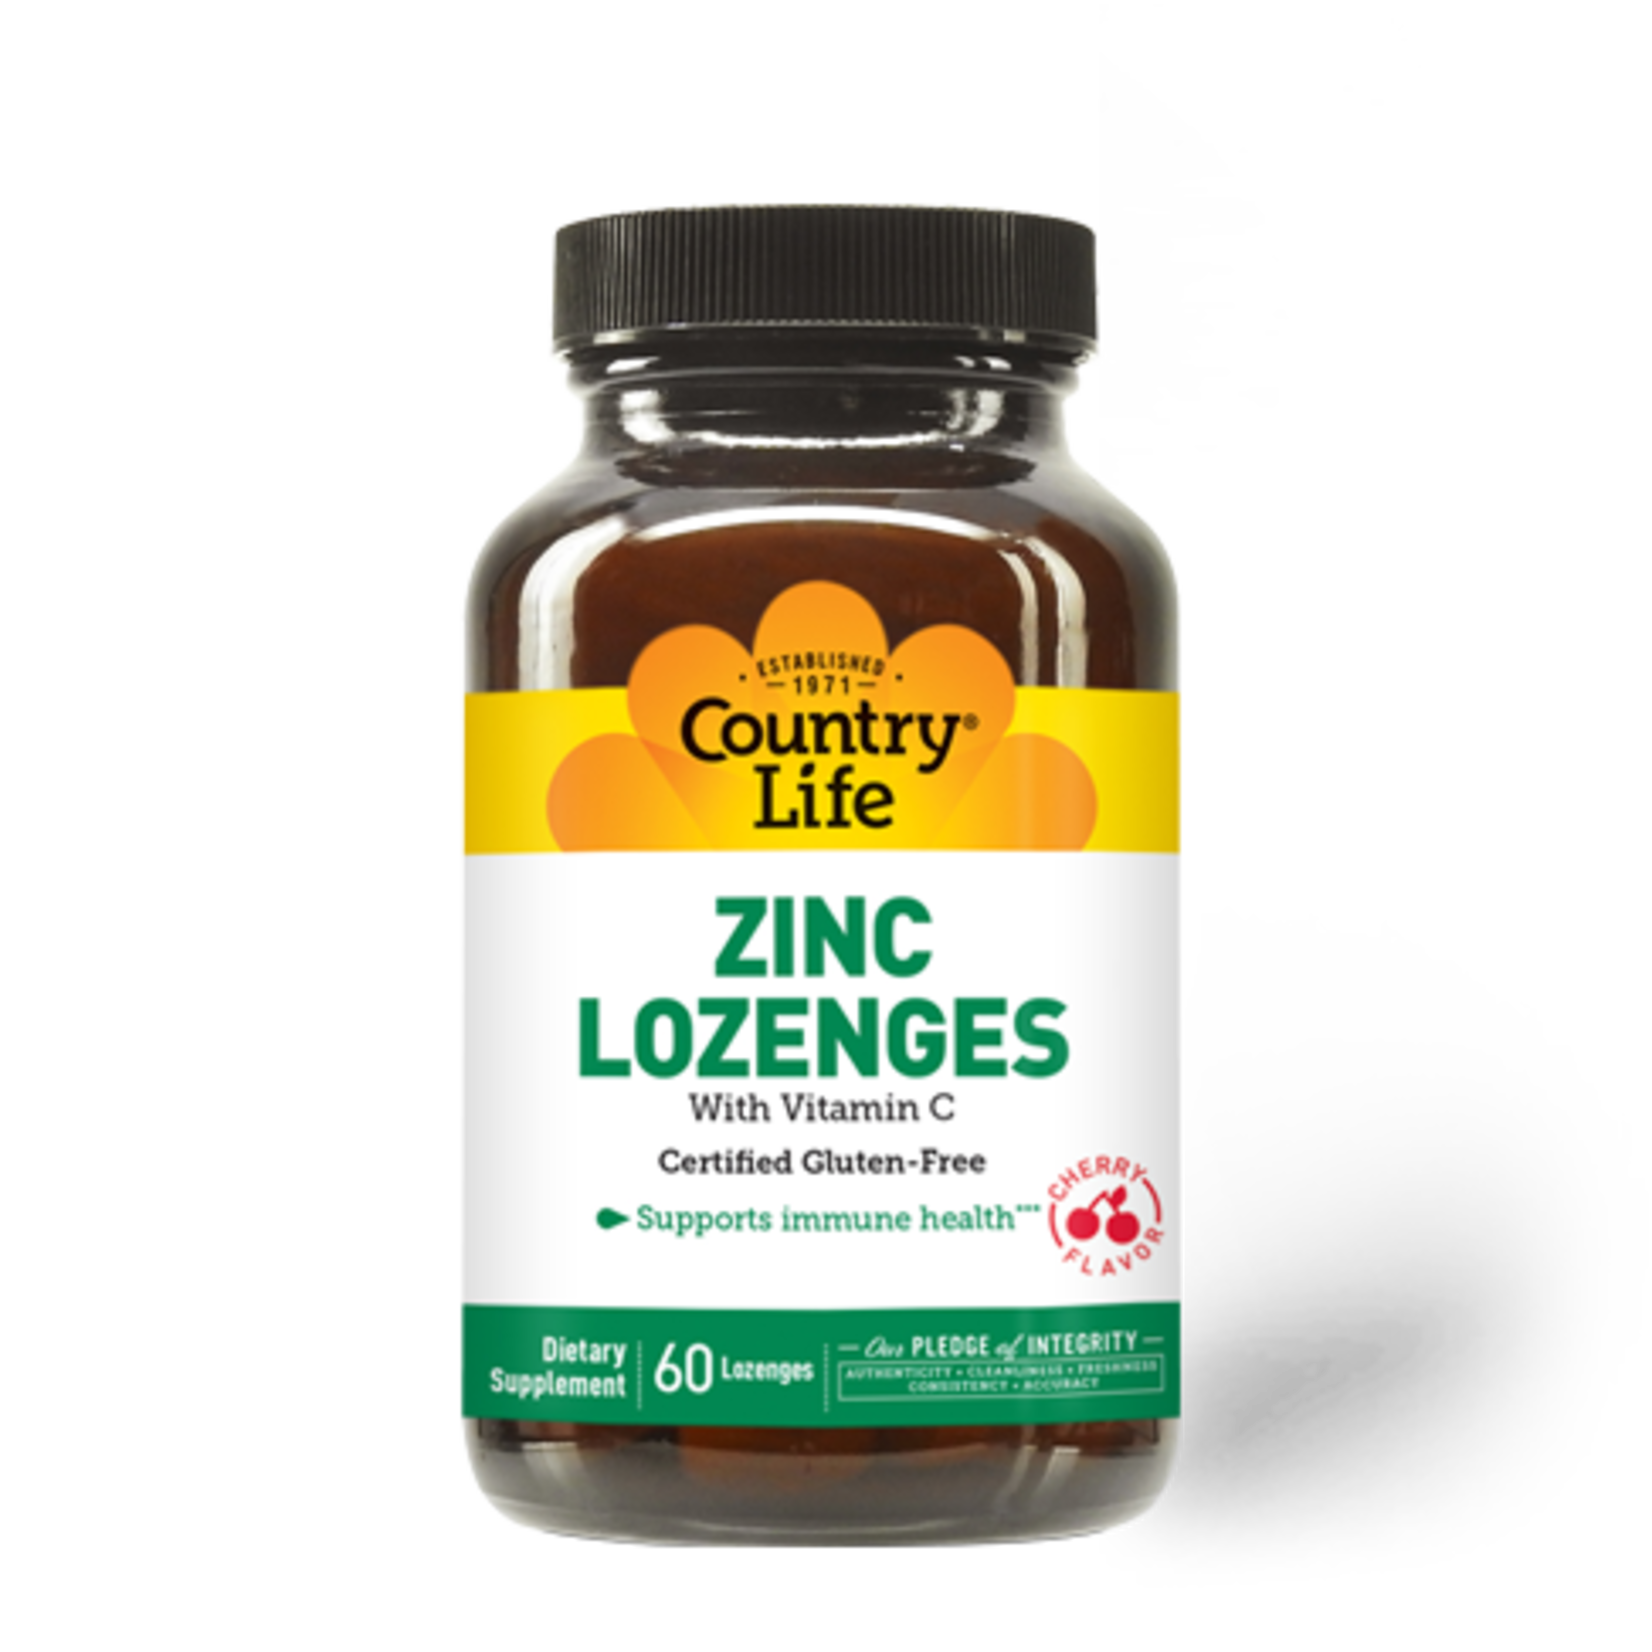 Country Life Country Life - Zinc Lozenges With Vitamin C Cherry - 60 Tablets